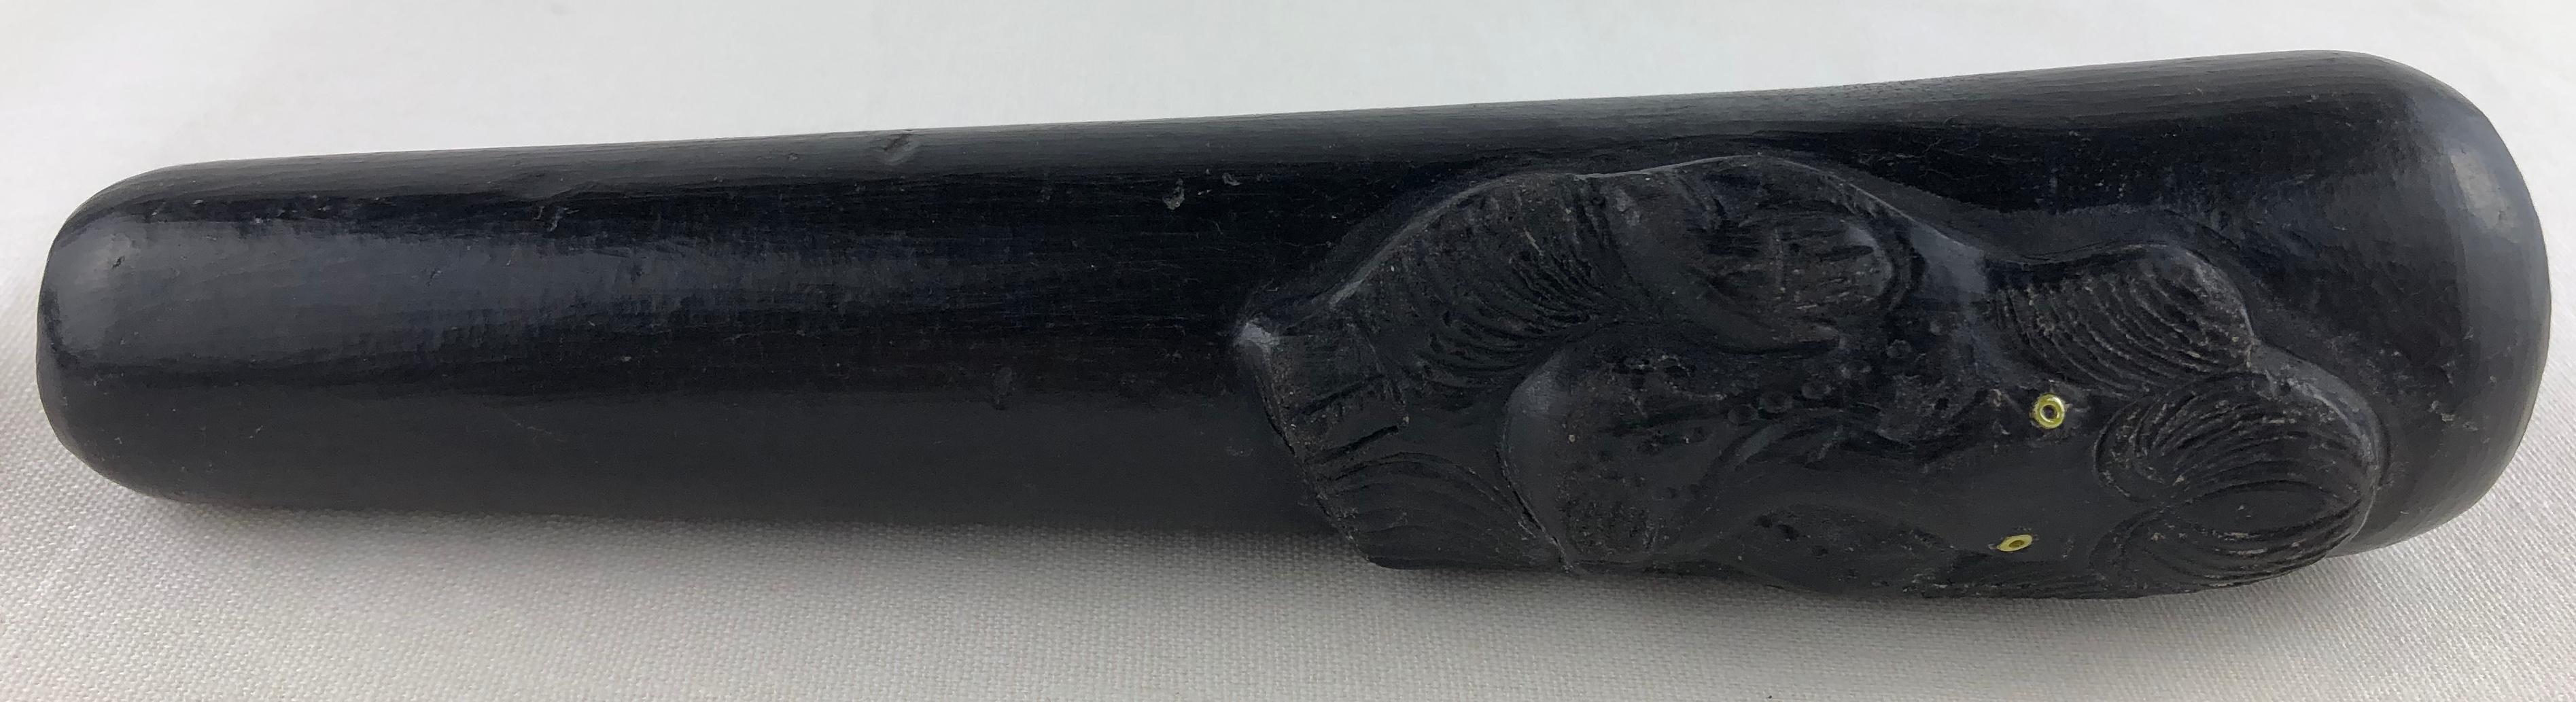 Hand-Carved Vintage Stone Pipe with Hand Carved Elephant Head from Kathmandu, Nepal For Sale